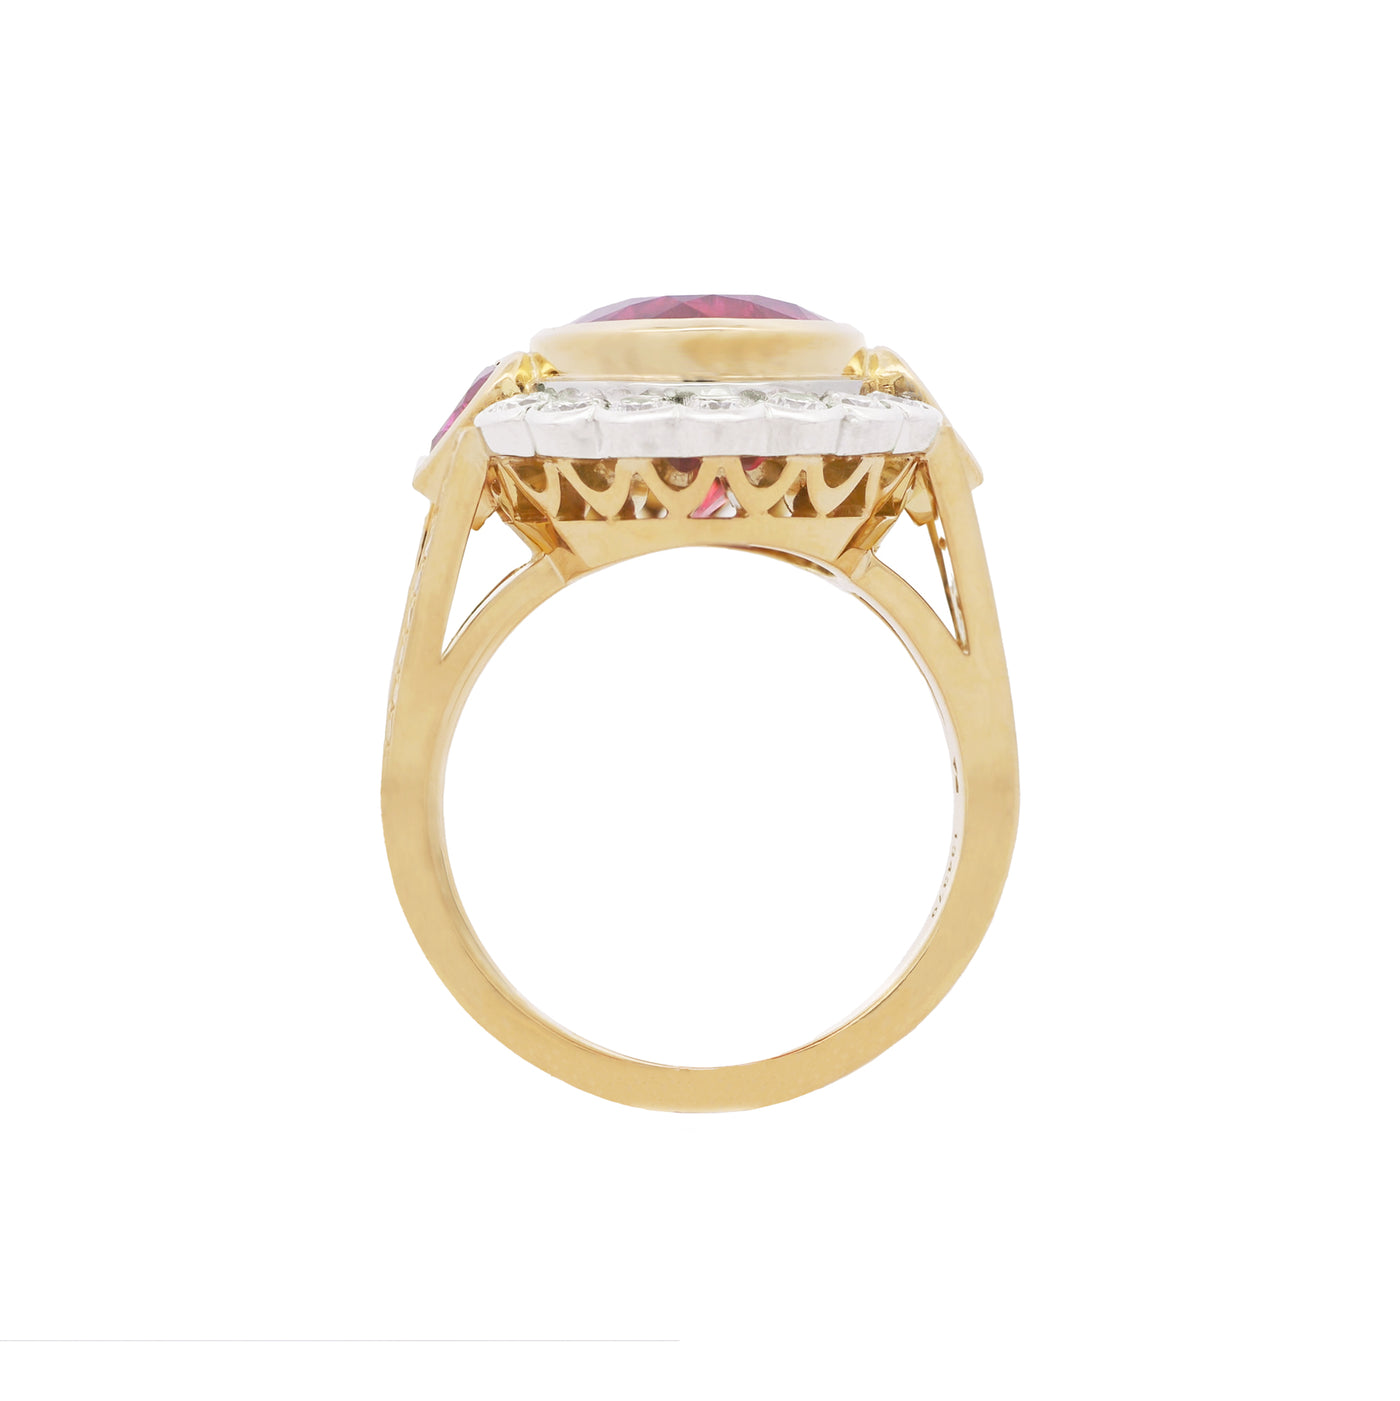 Queen of Hearts: Rubellite Halo Ring in Yellow Gold | 7.29ct